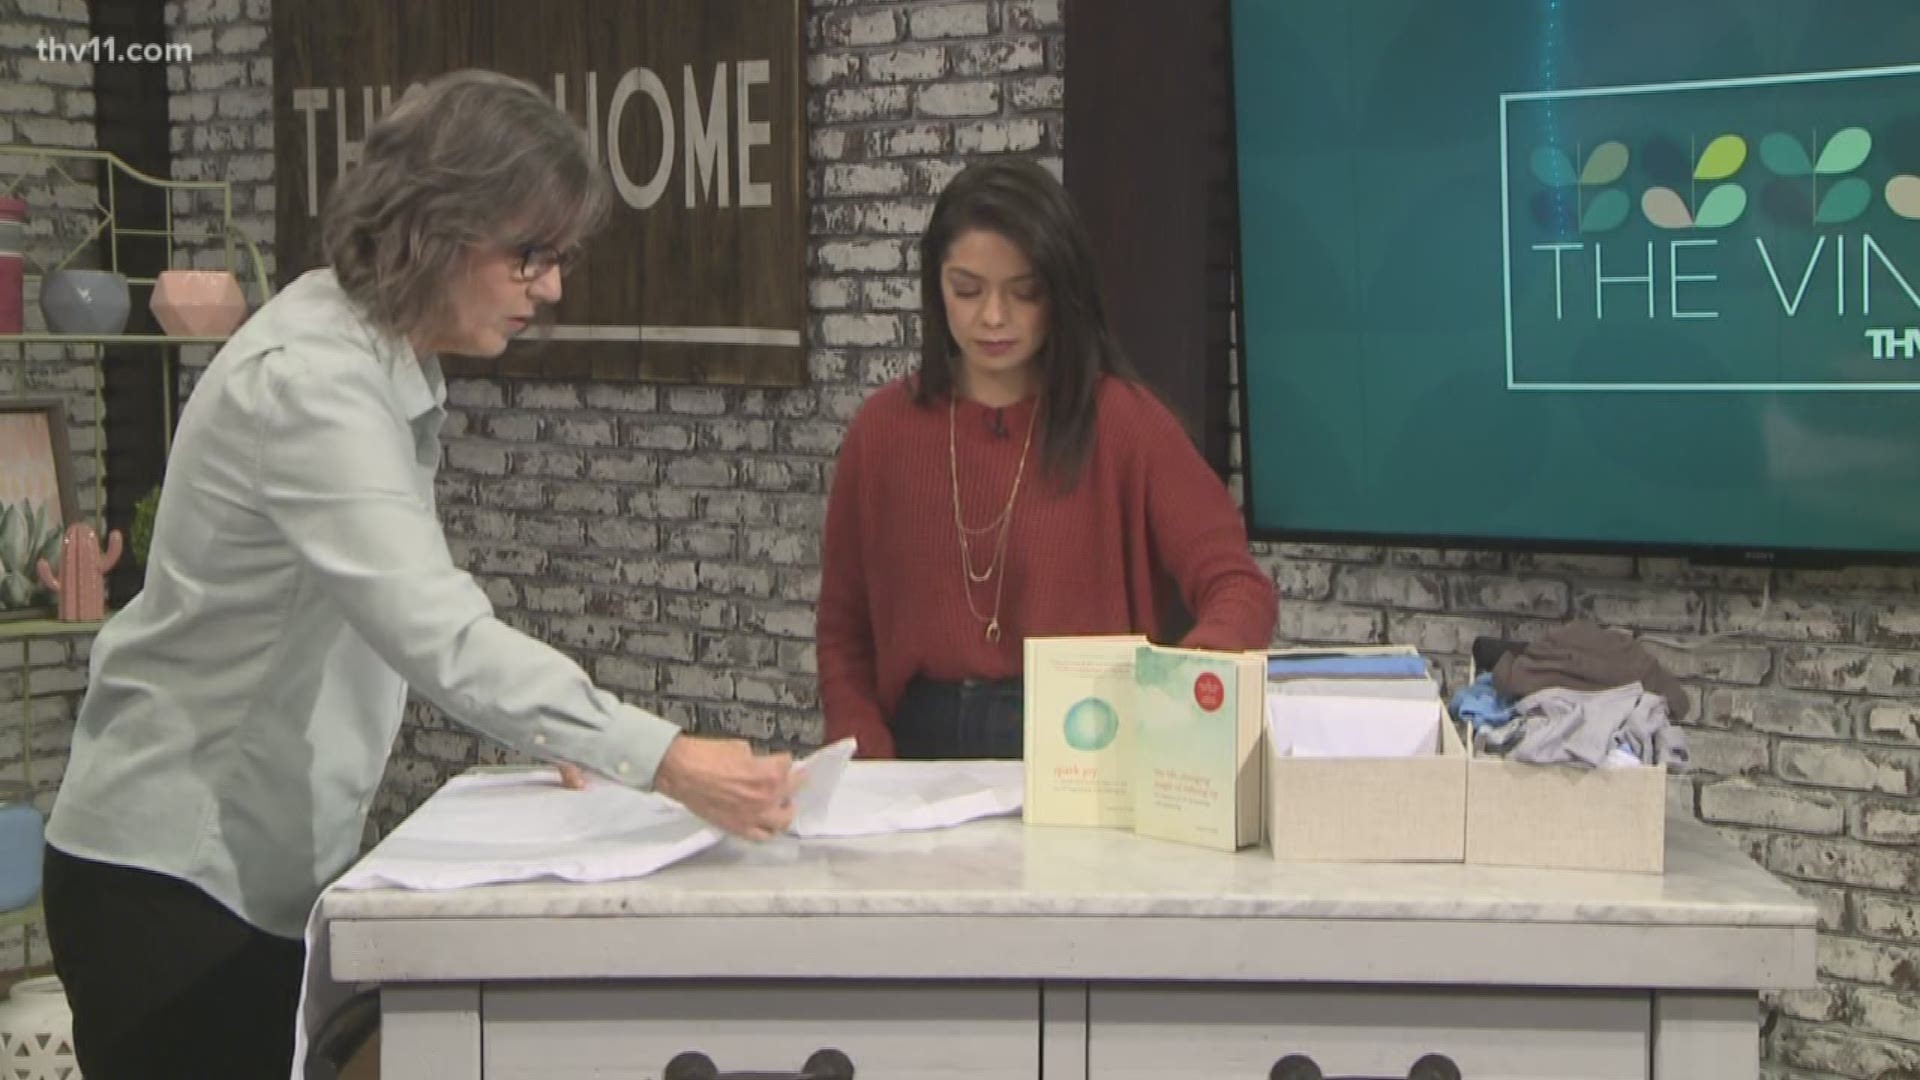 Sue Fehlberg with Tidy Nest teaches the KonMari method of de-cluttering your home. The technique is gaining popularity because of a new Netflix show called "Tidying Up with Marie Kondo."